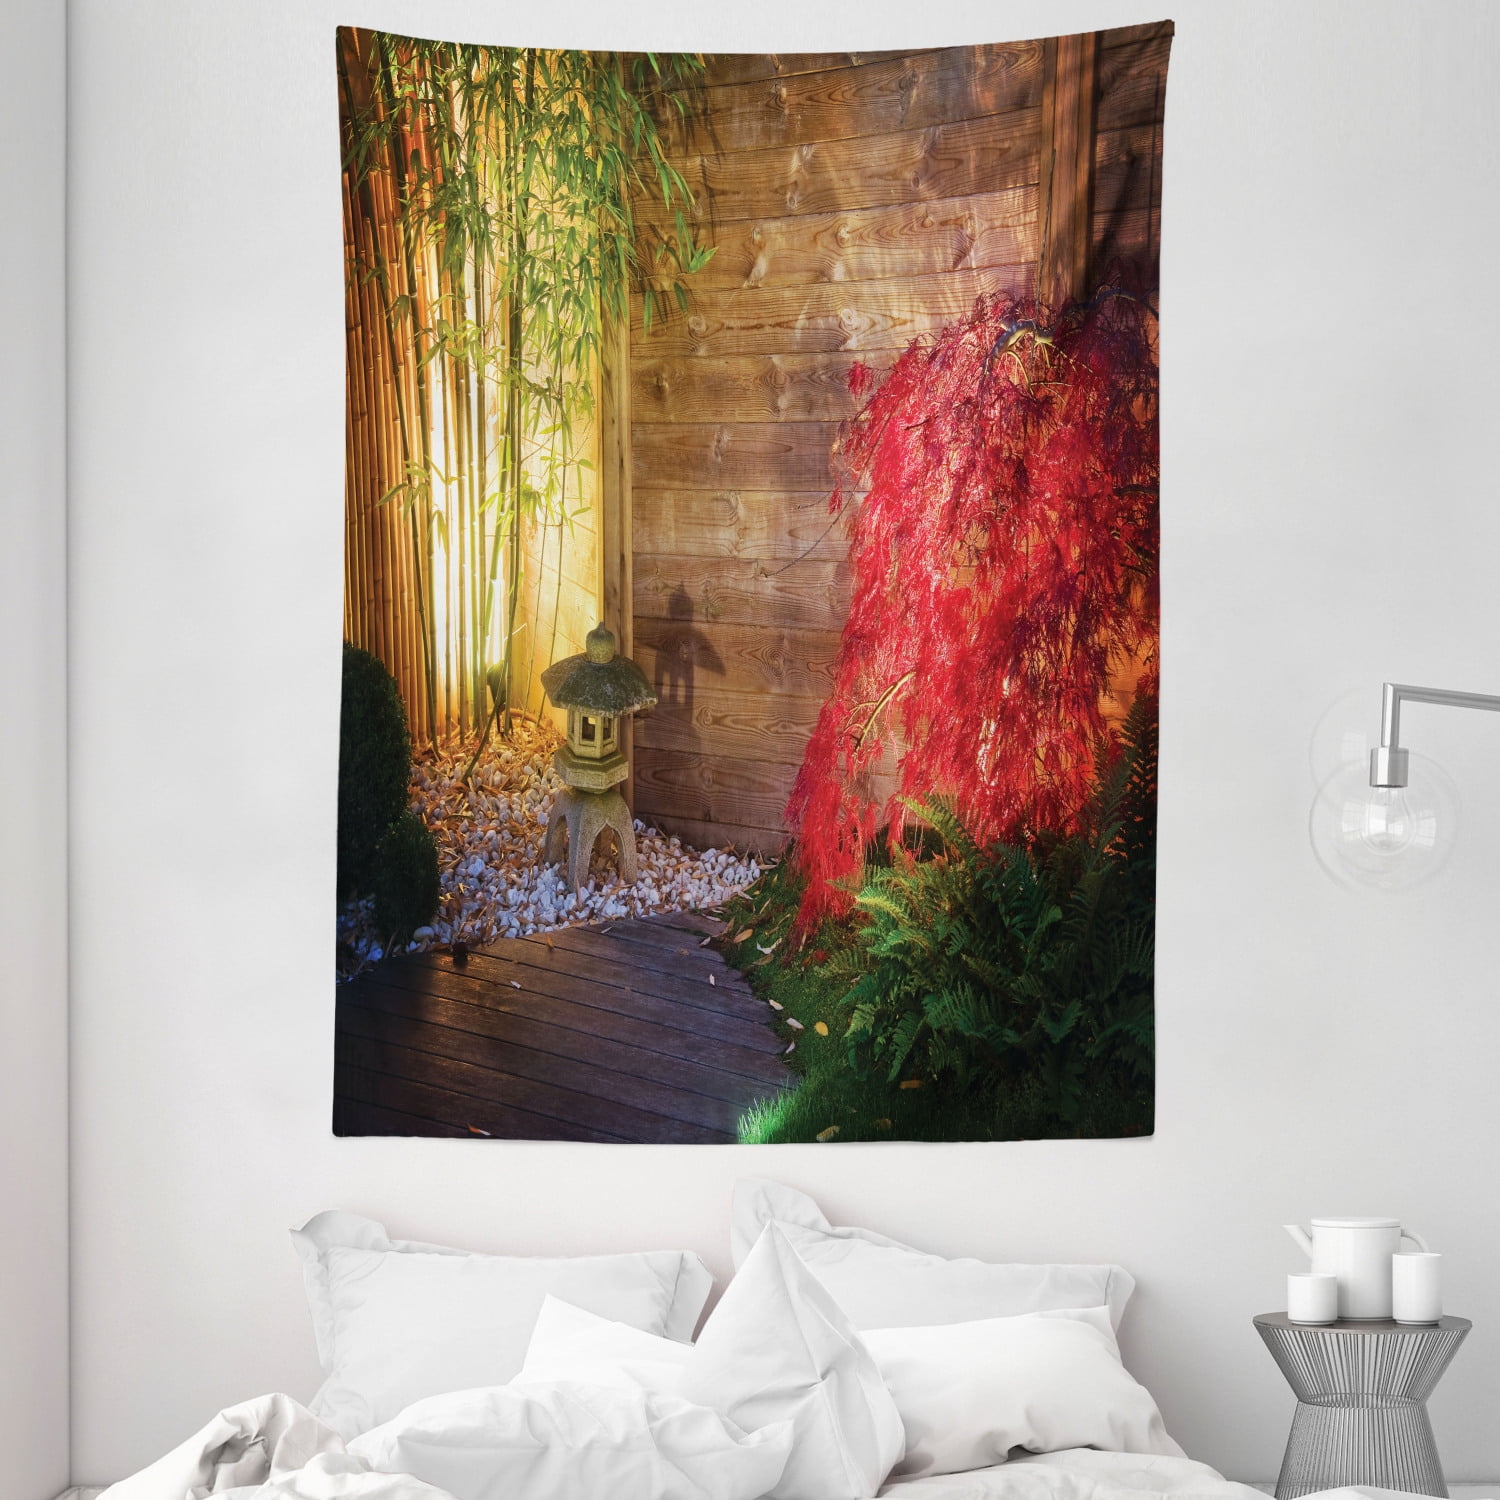 Moth, 40W X 60H Nature Woman Tapestries Poster Blanket College Dorm Home Decor Trippy Floral Moon Vertical Tapestry Aesthetic Flower Black Witchy Tarot Decor Tapestry Wall Hanging for Bedroom